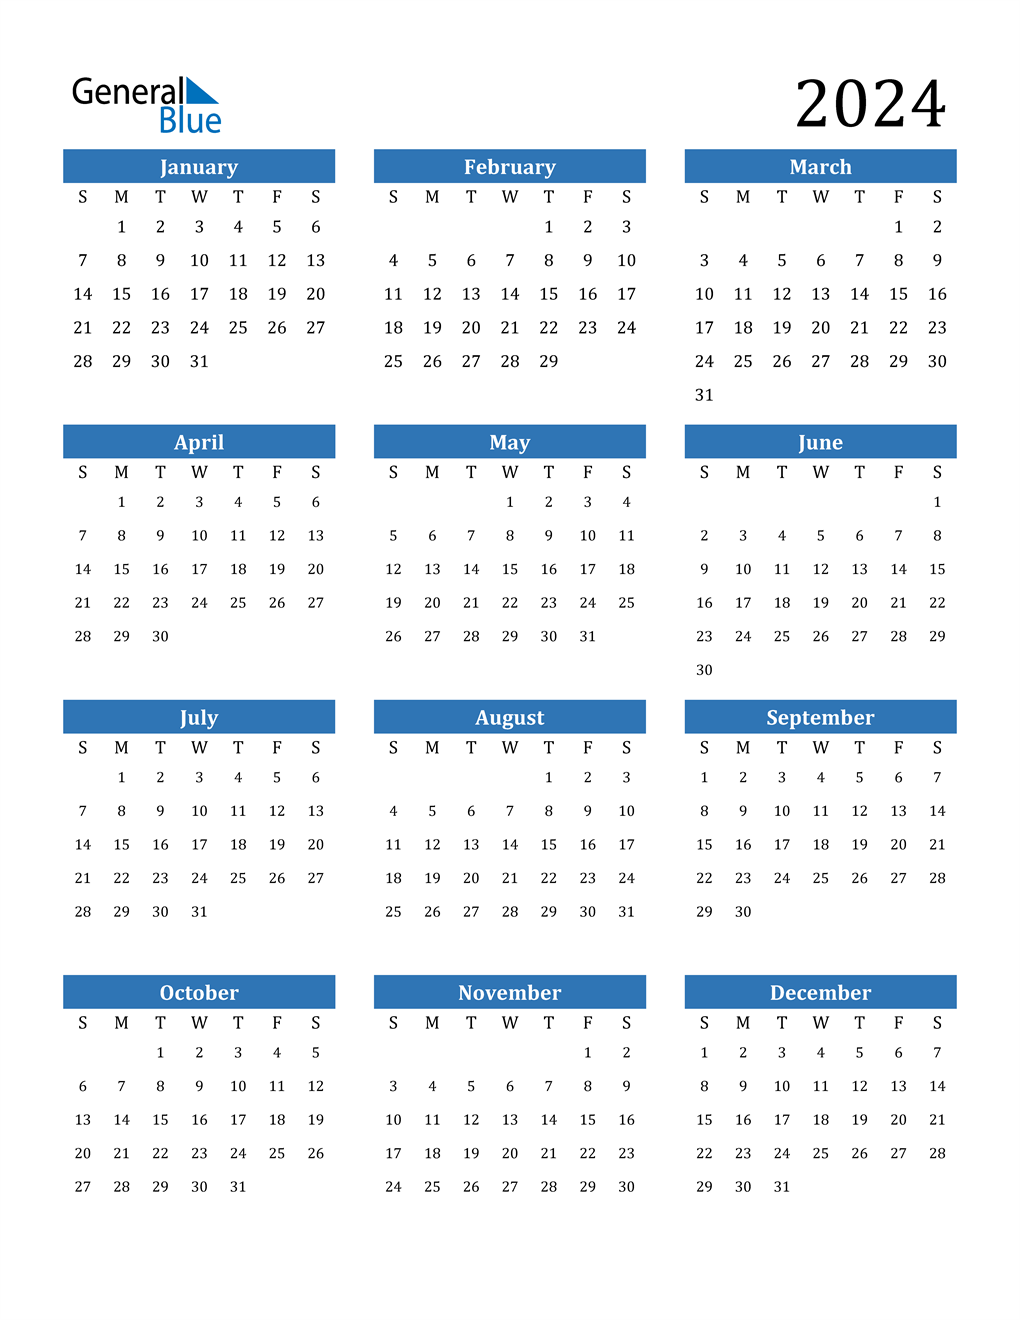 2024 Calendar Printable Free - Free Printable 2024 Calendar 2months In Page With Holidays